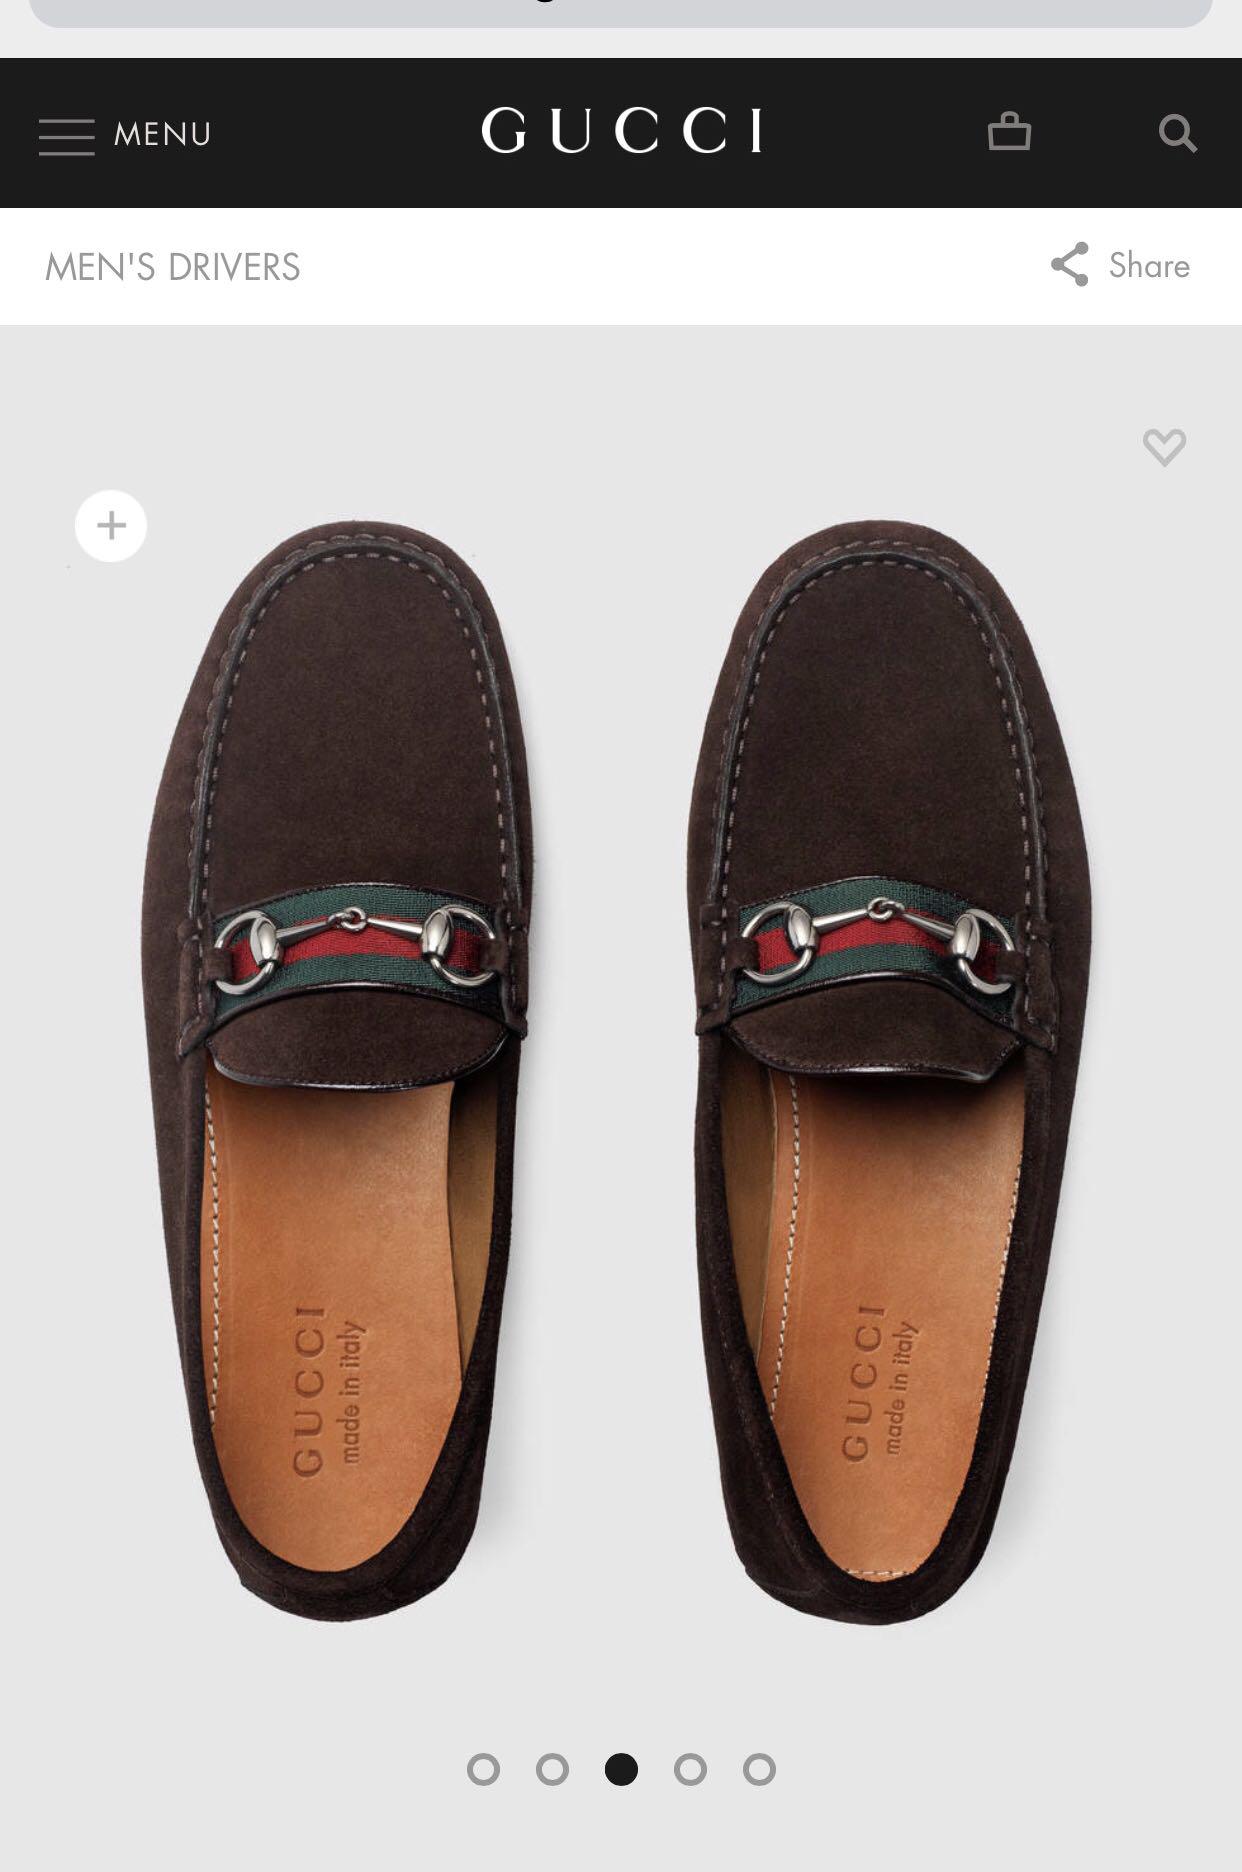 gucci drivers shoes